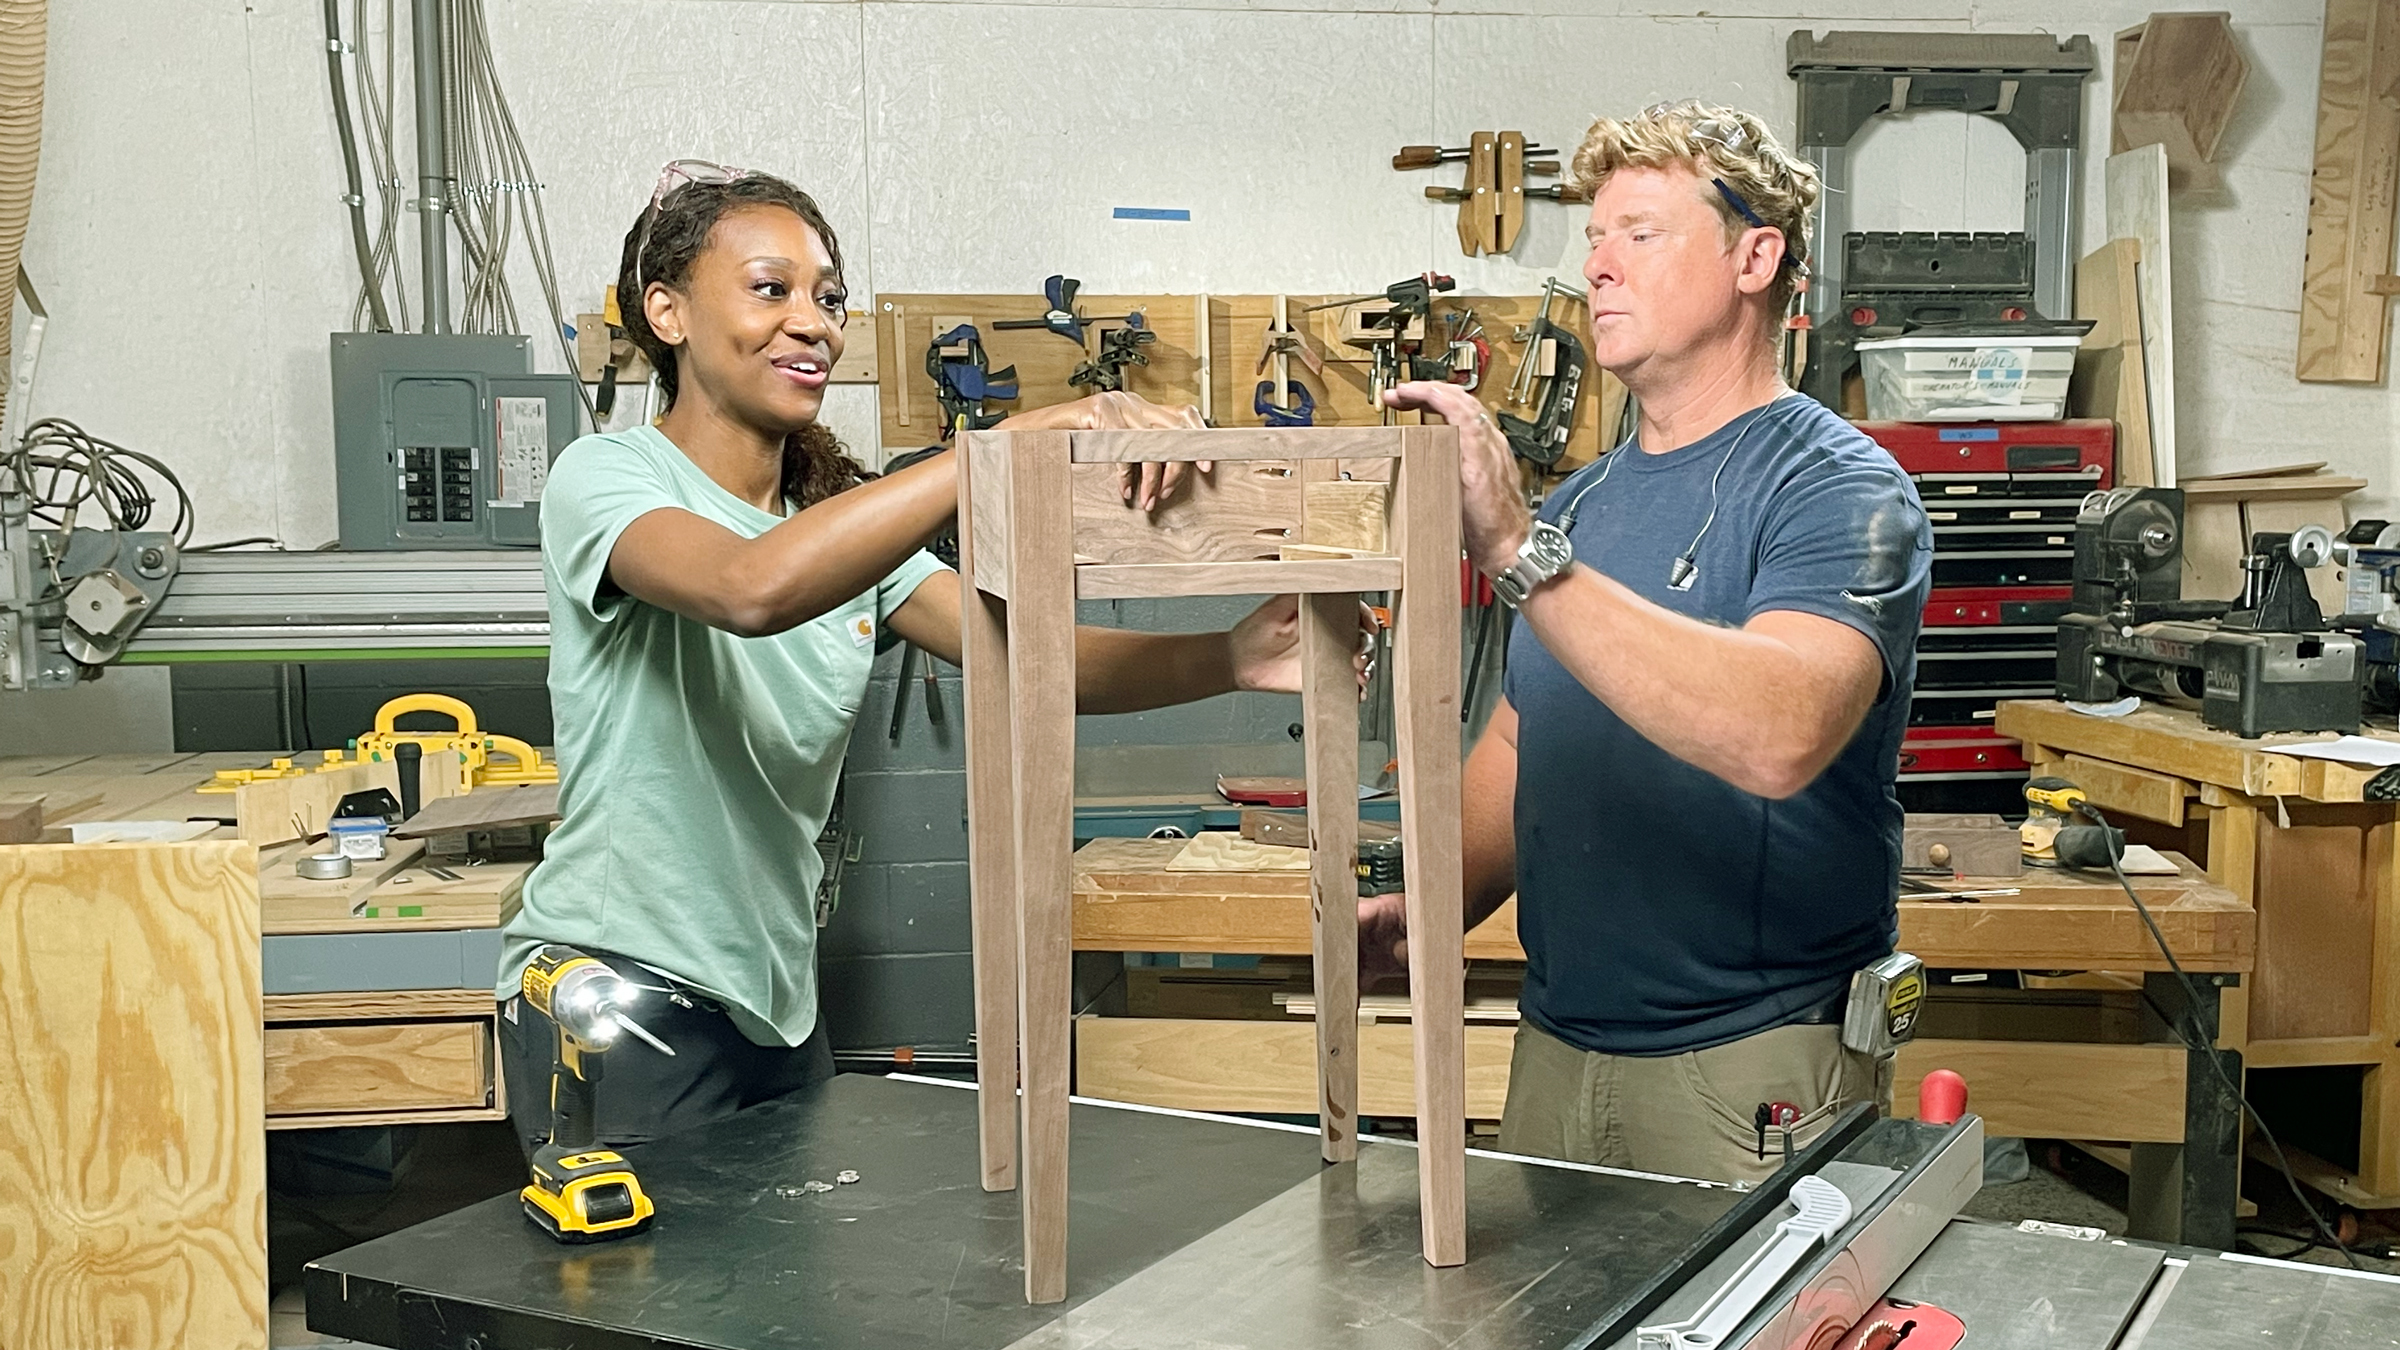 Char Miller-King and Kevin O’Connor work together to build a Shaker-style end table.